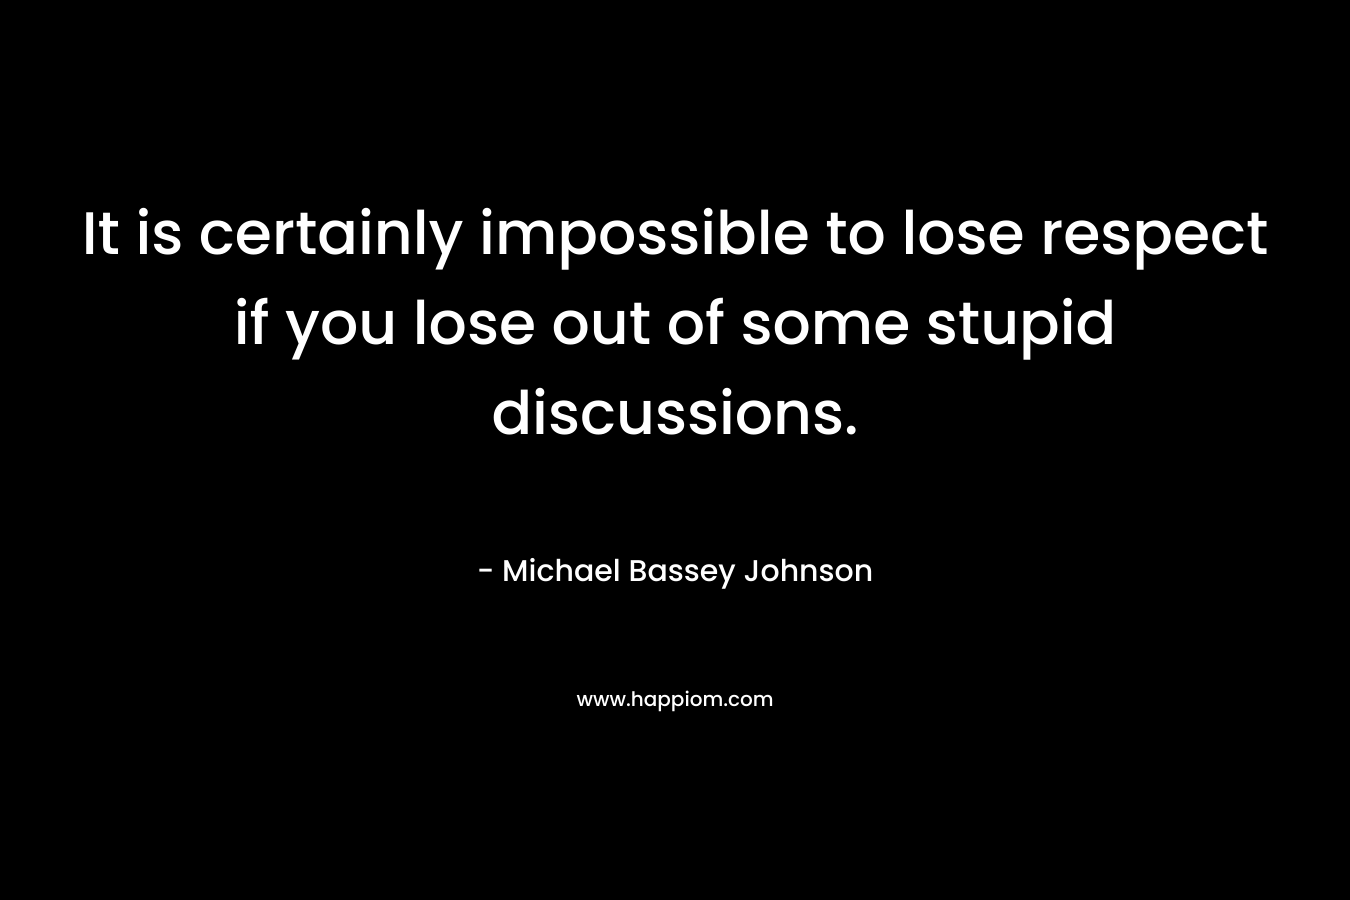 It is certainly impossible to lose respect if you lose out of some stupid discussions. – Michael Bassey Johnson